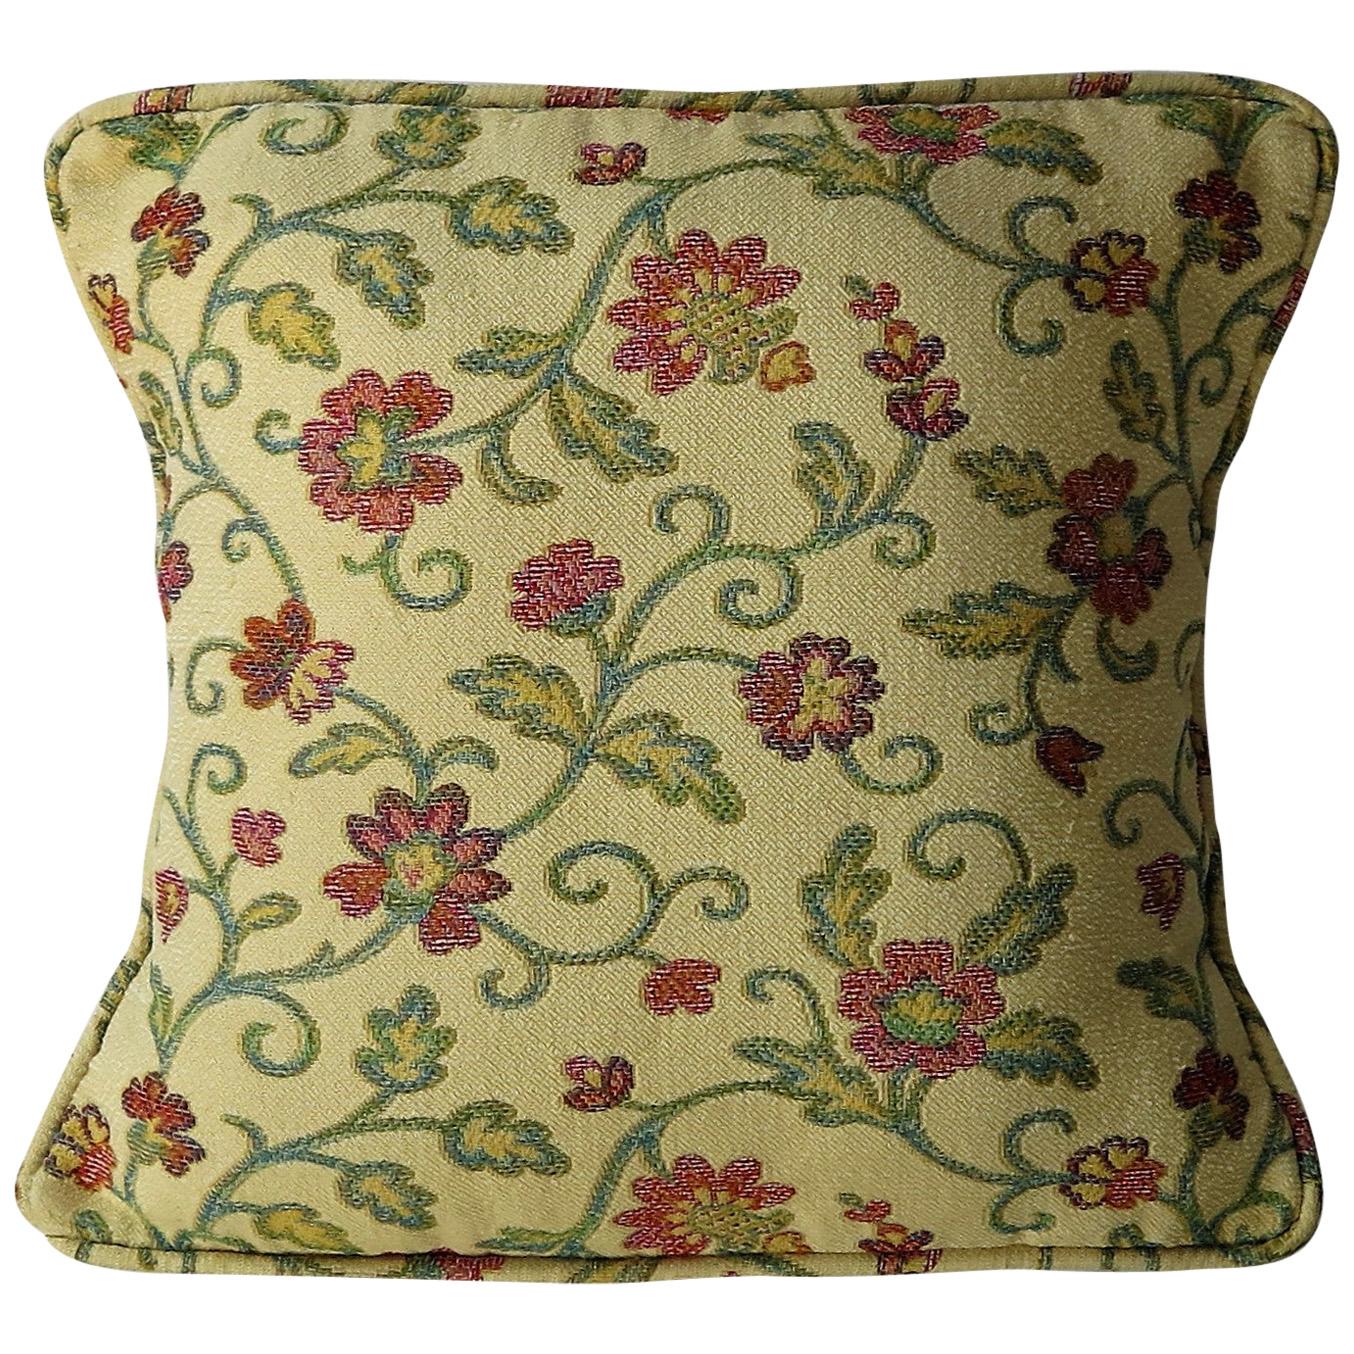 Woven Cushion or Pillow in Art Nouveau Floral Vine Style, 20th Century For Sale